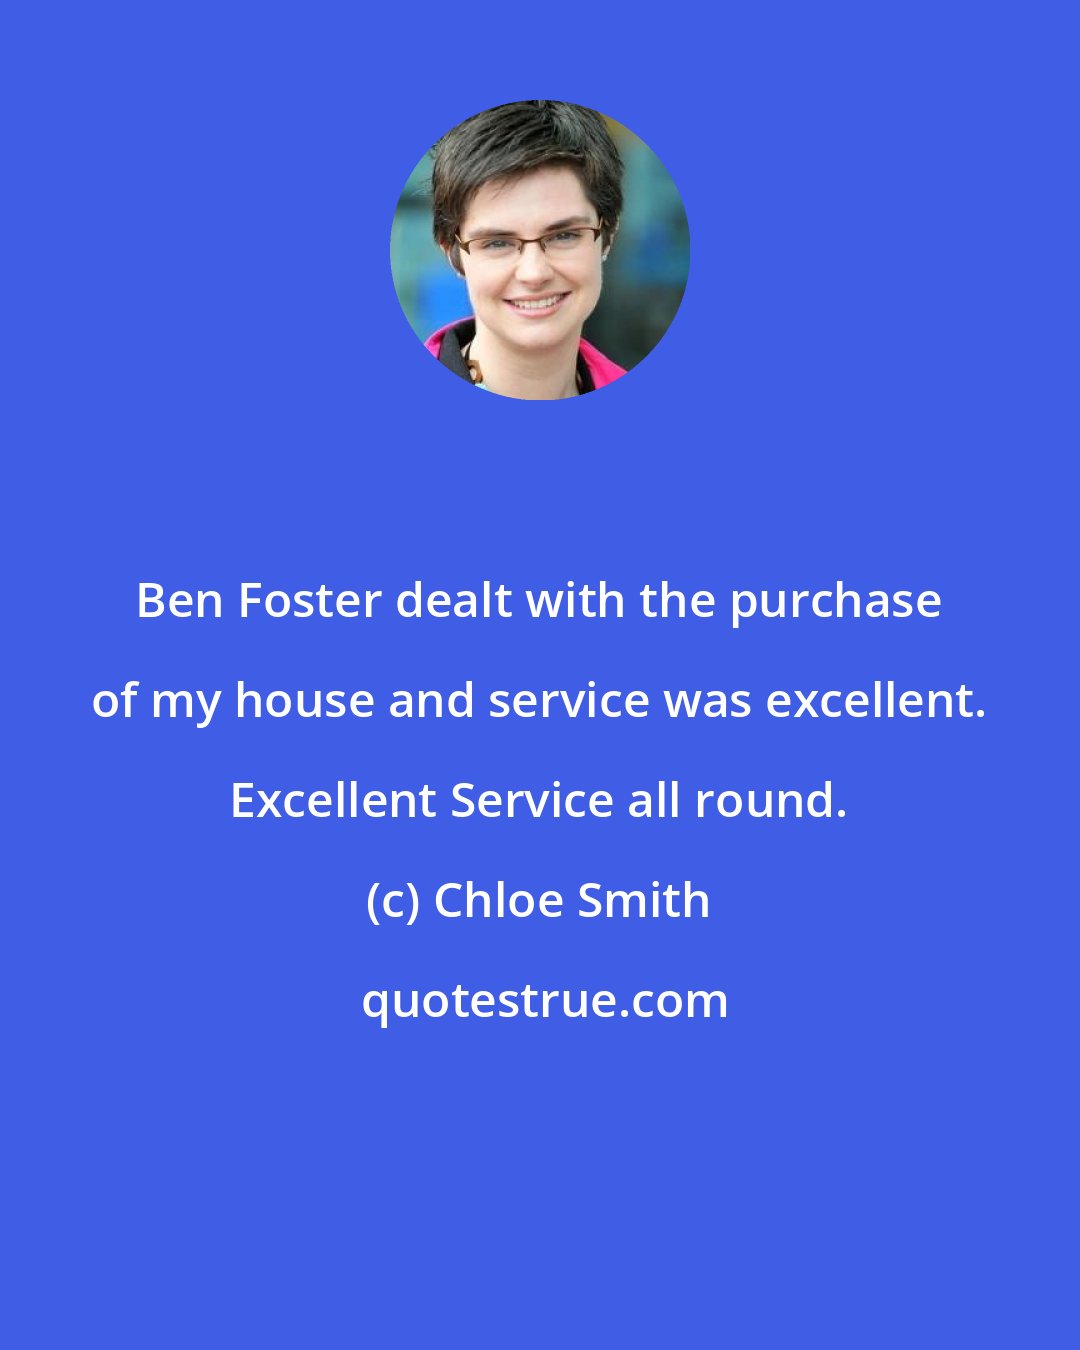 Chloe Smith: Ben Foster dealt with the purchase of my house and service was excellent. Excellent Service all round.